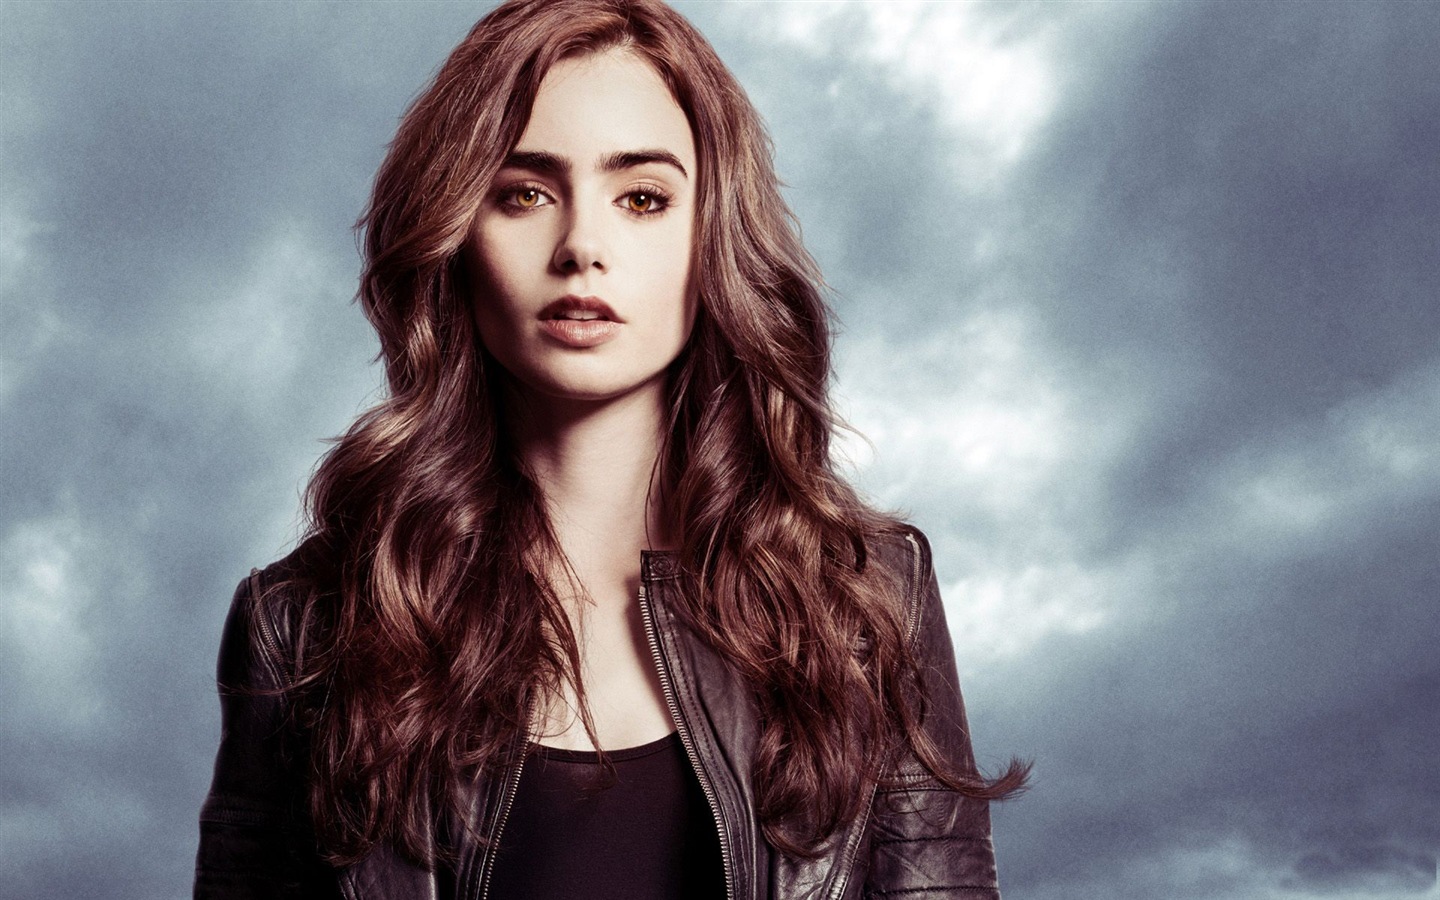 Lily Collins beautiful wallpapers #18 - 1440x900